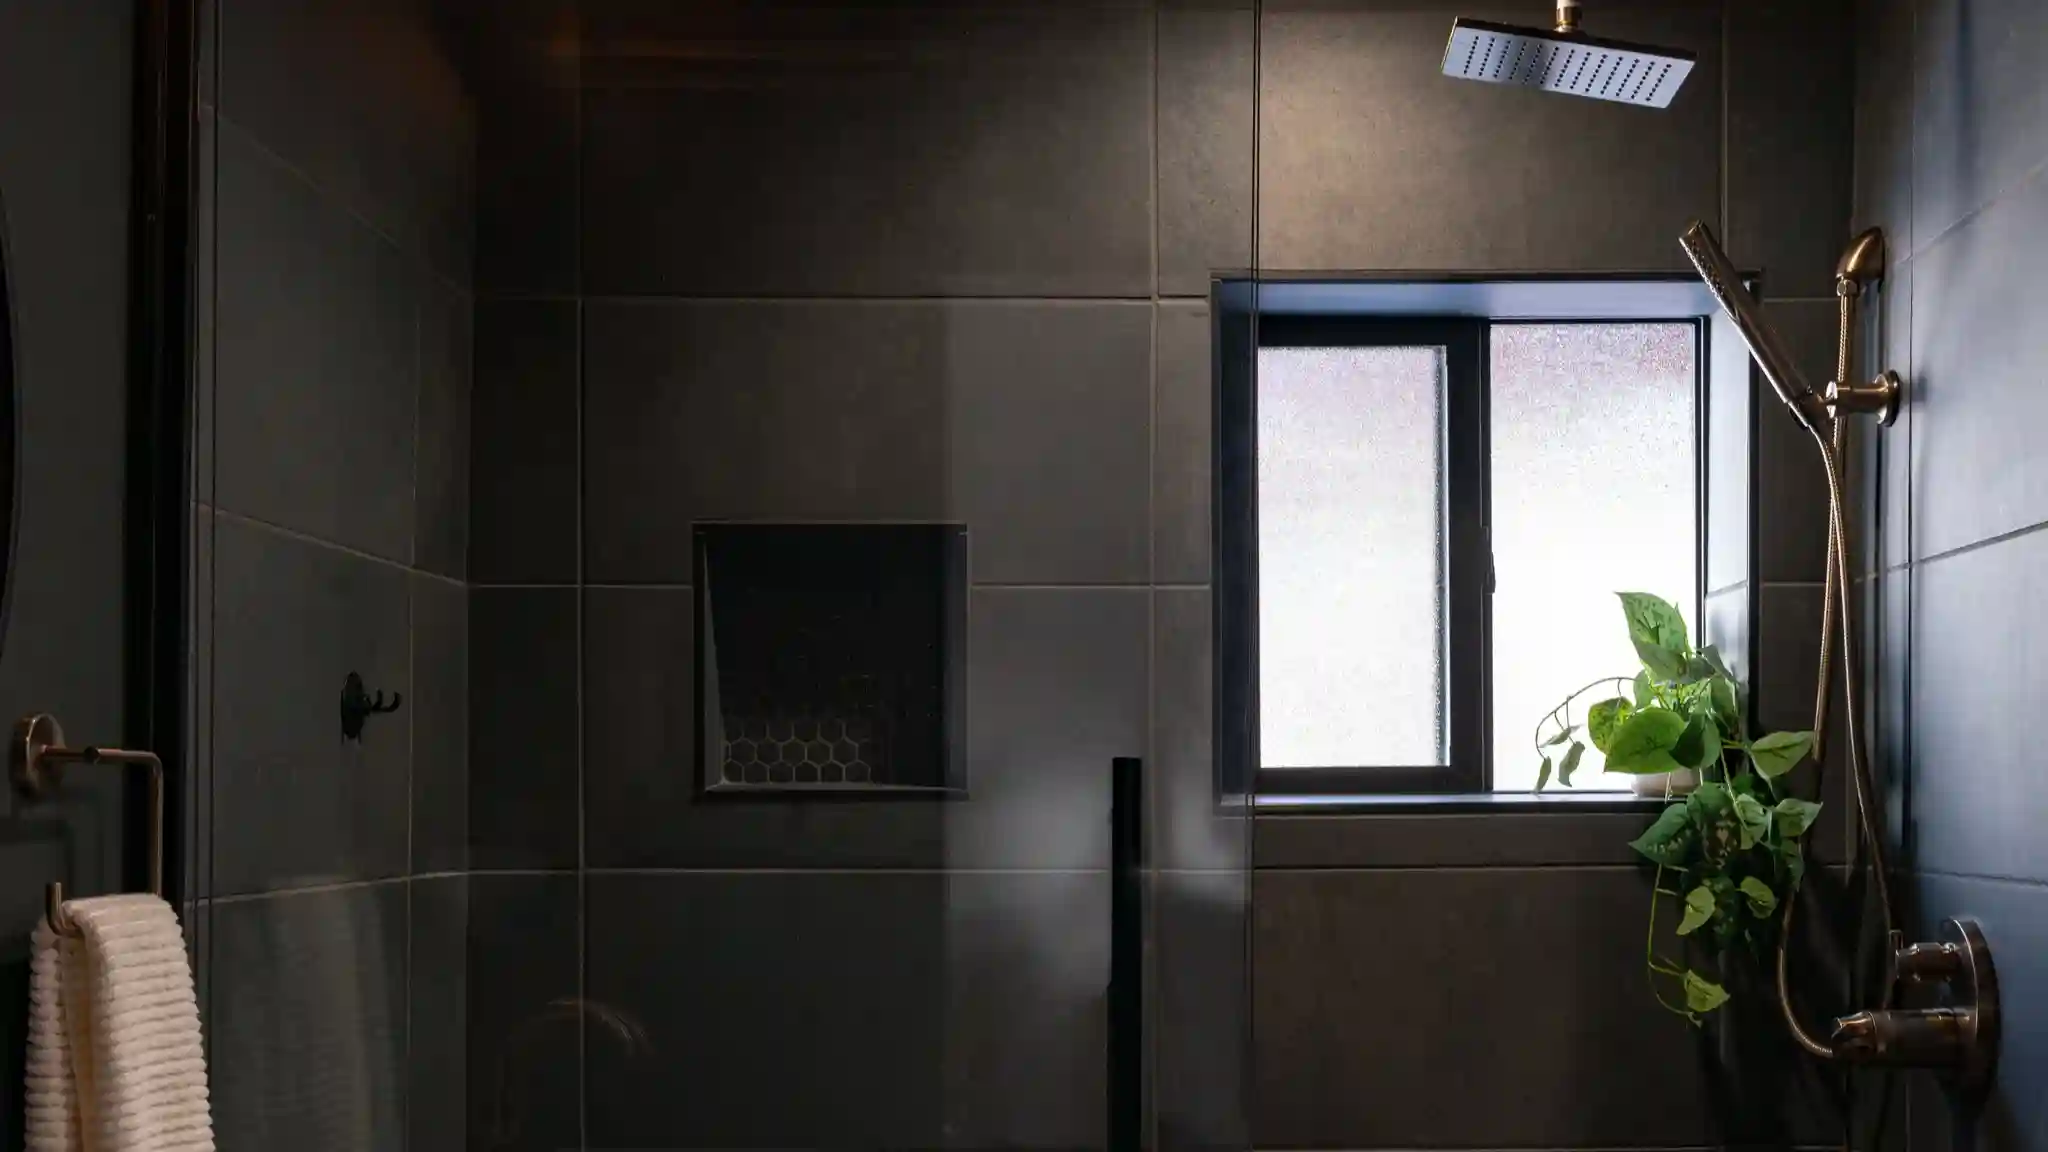 An all black tiled shower with a slliding glass door. The hardware is brass and contrasts against all of the black. A small window lets in some natural light into the bathroom.